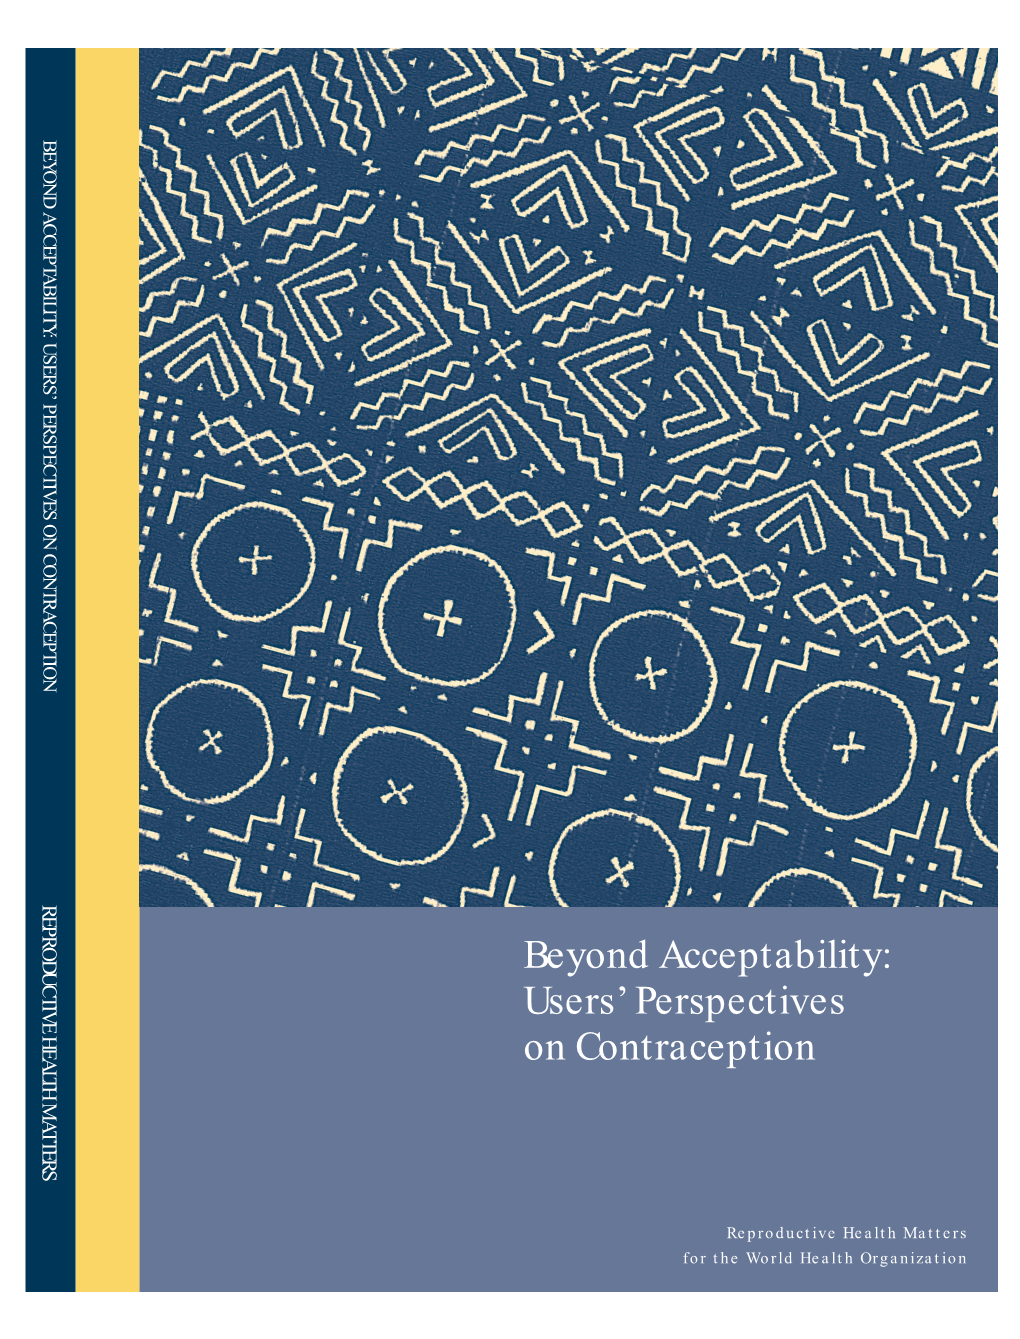 Beyond Acceptability: Users' Perspectives on Contraception